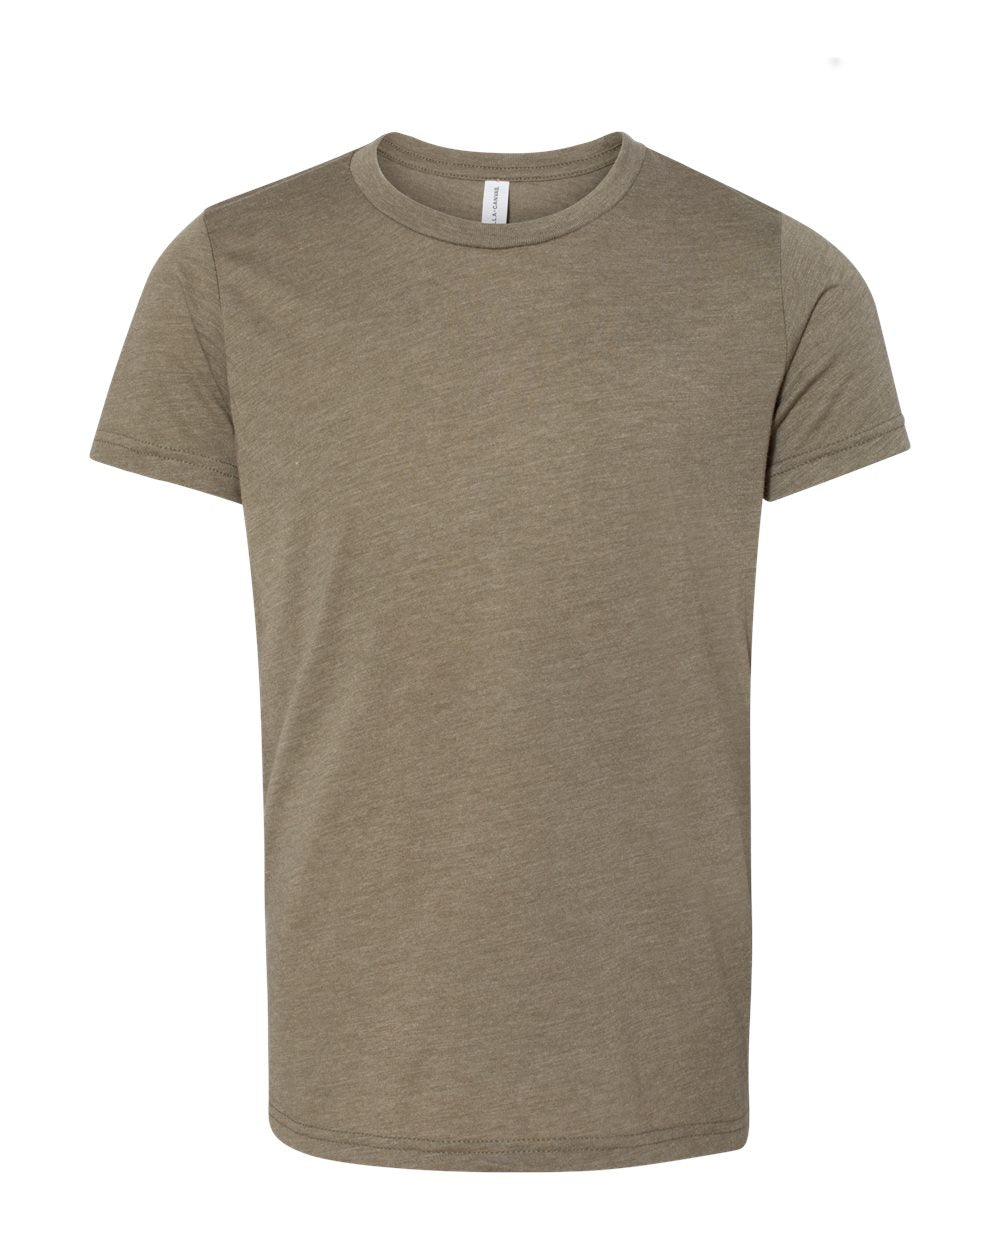 Bella + Canvas Youth Triblend Tee (3413y) in Olive Triblend